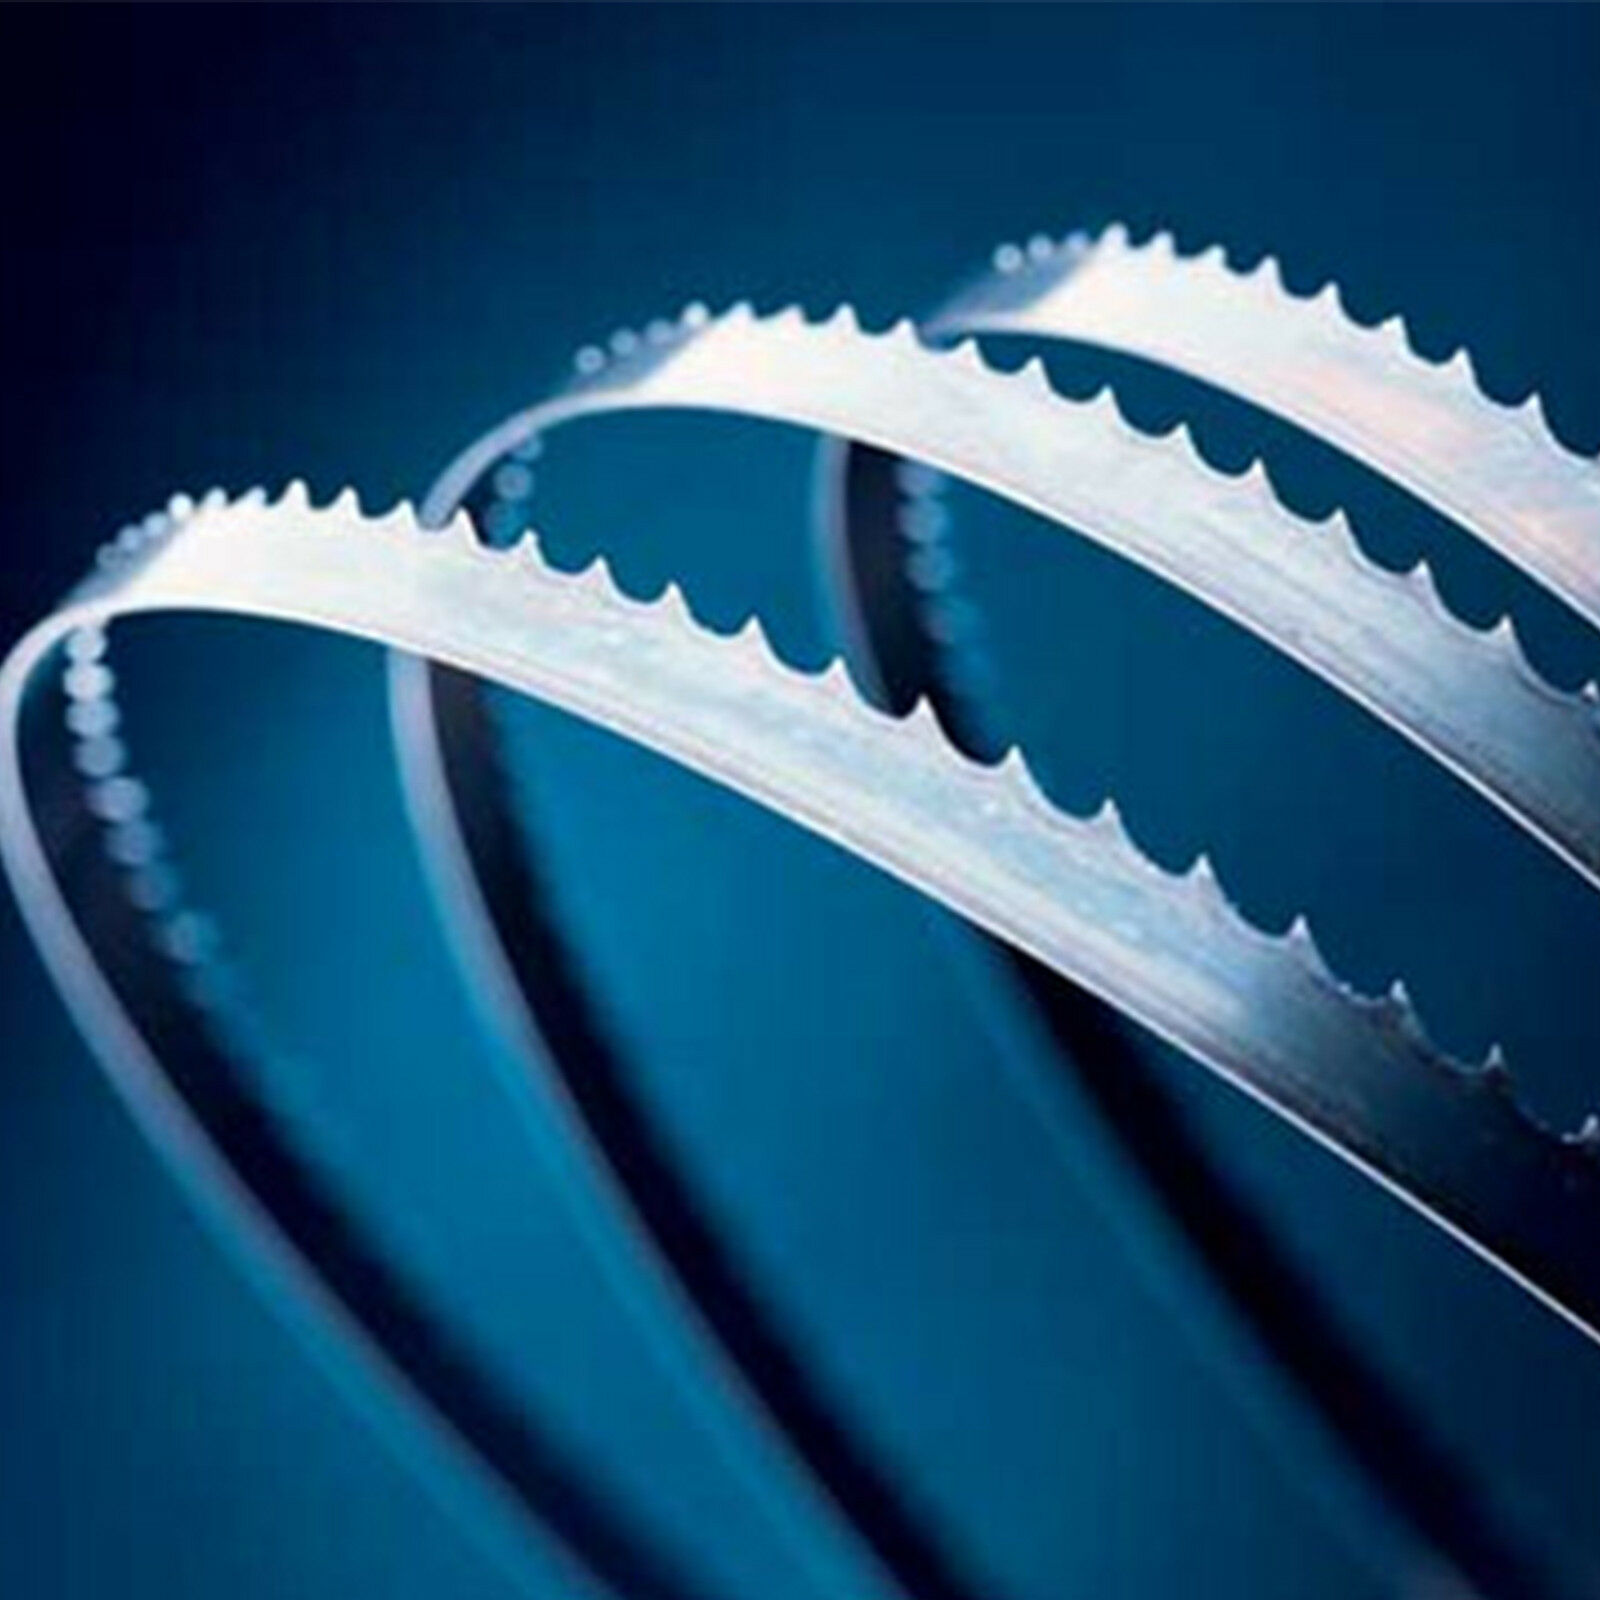 Band saw blades for woodworking